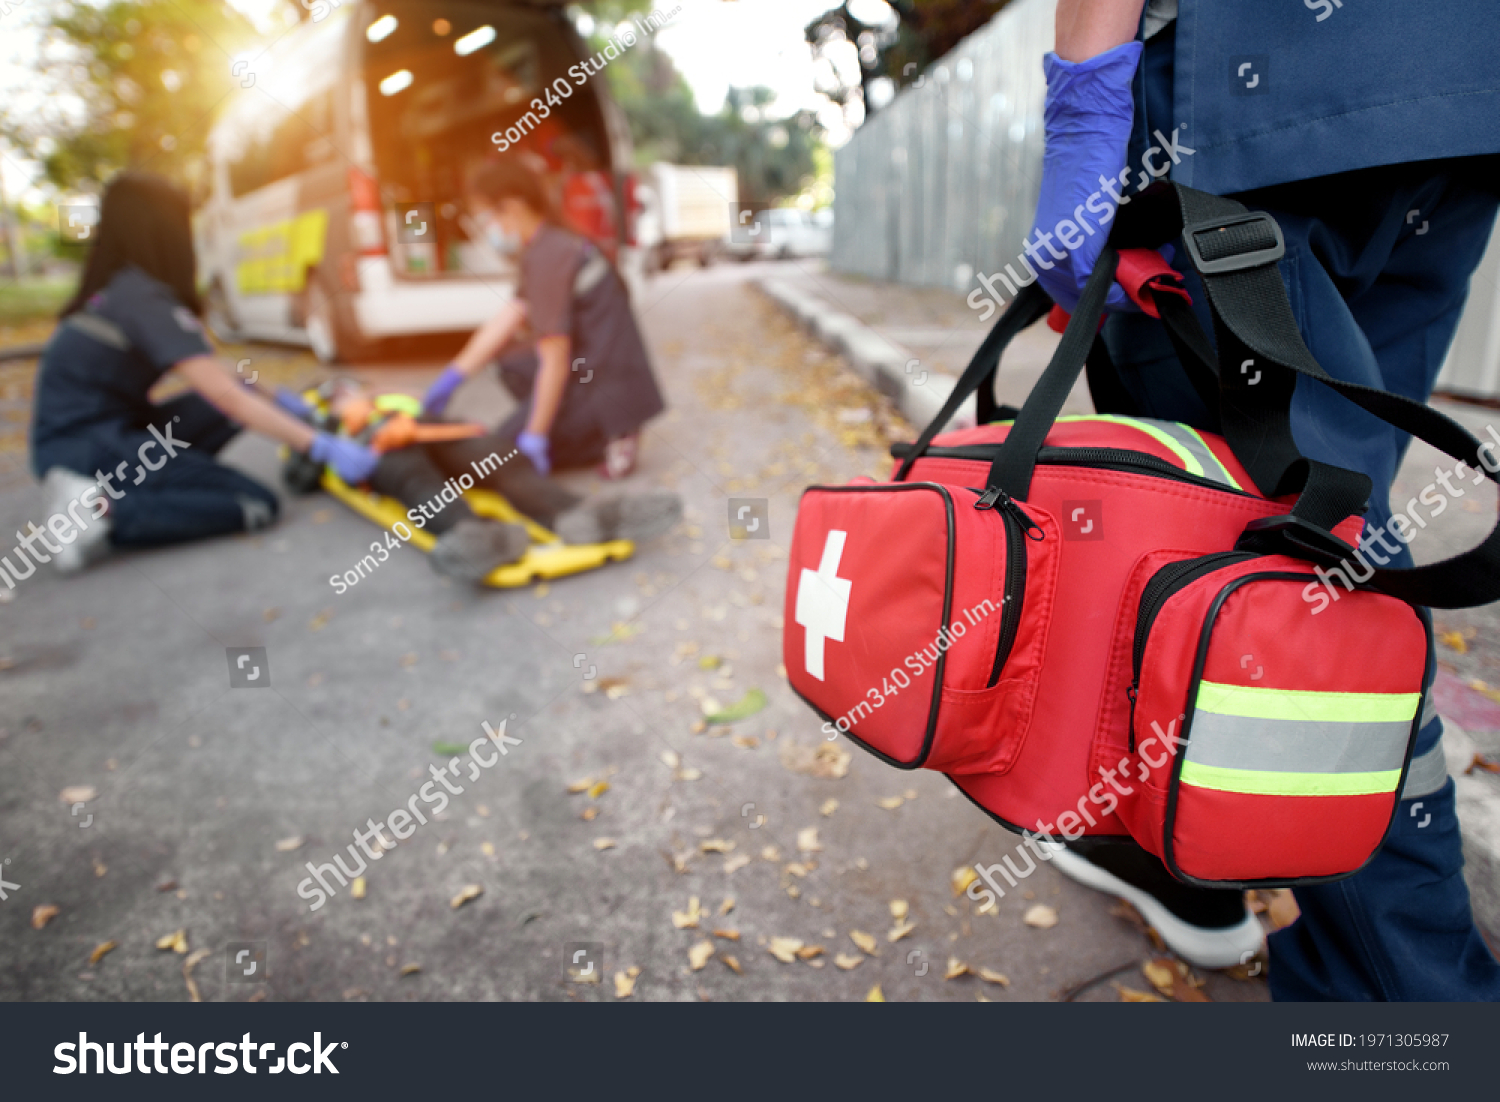 Emergency Medical First aid kit bags of first aid team service for an accident in work of worker loss of function in limbs, First aid training to transfer patient #1971305987